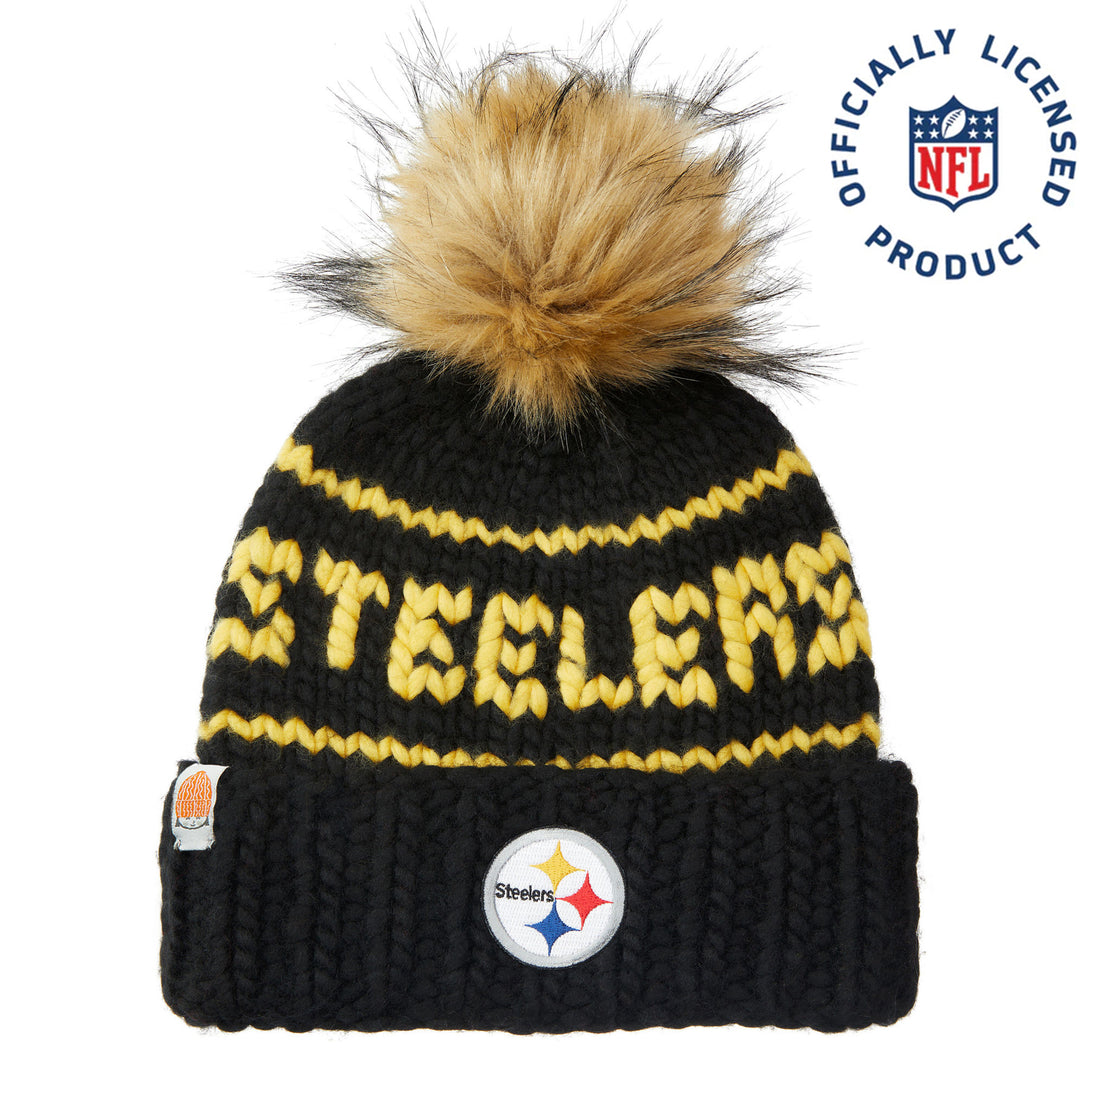 The Steelers NFL Beanie with Faux Fur Pom